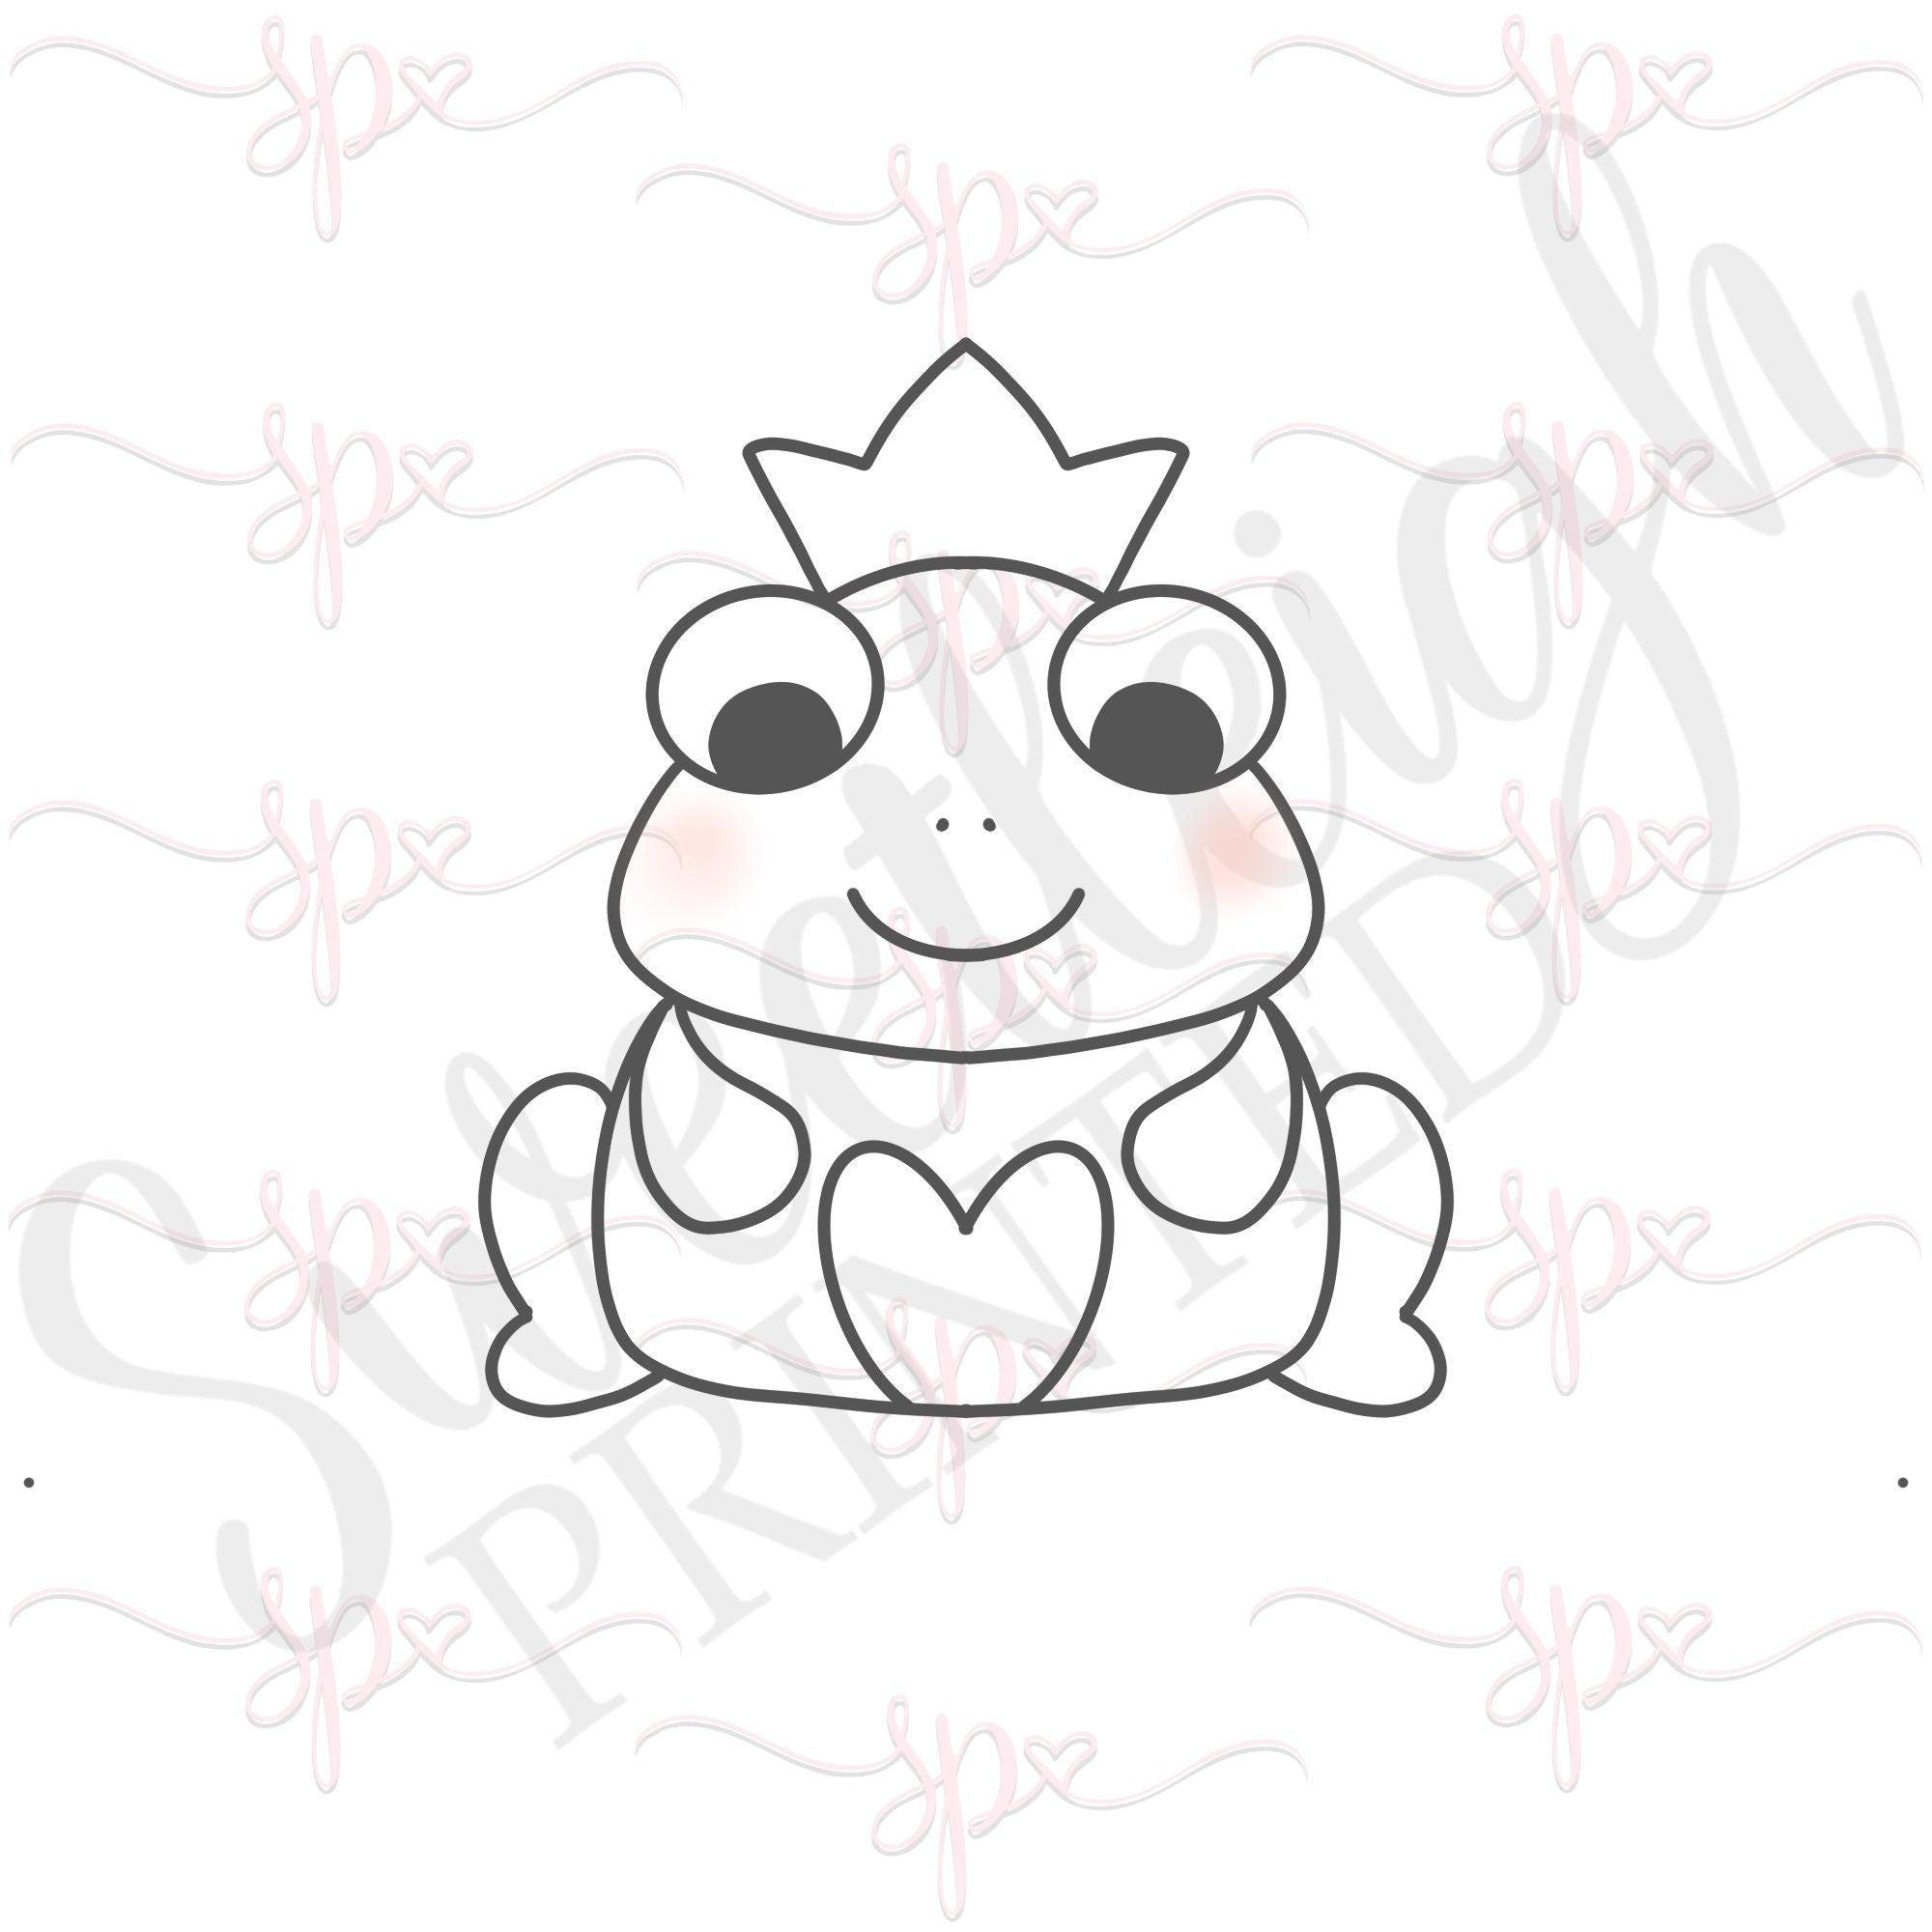 Frog Prince Cookie Cutter - Sweetleigh 